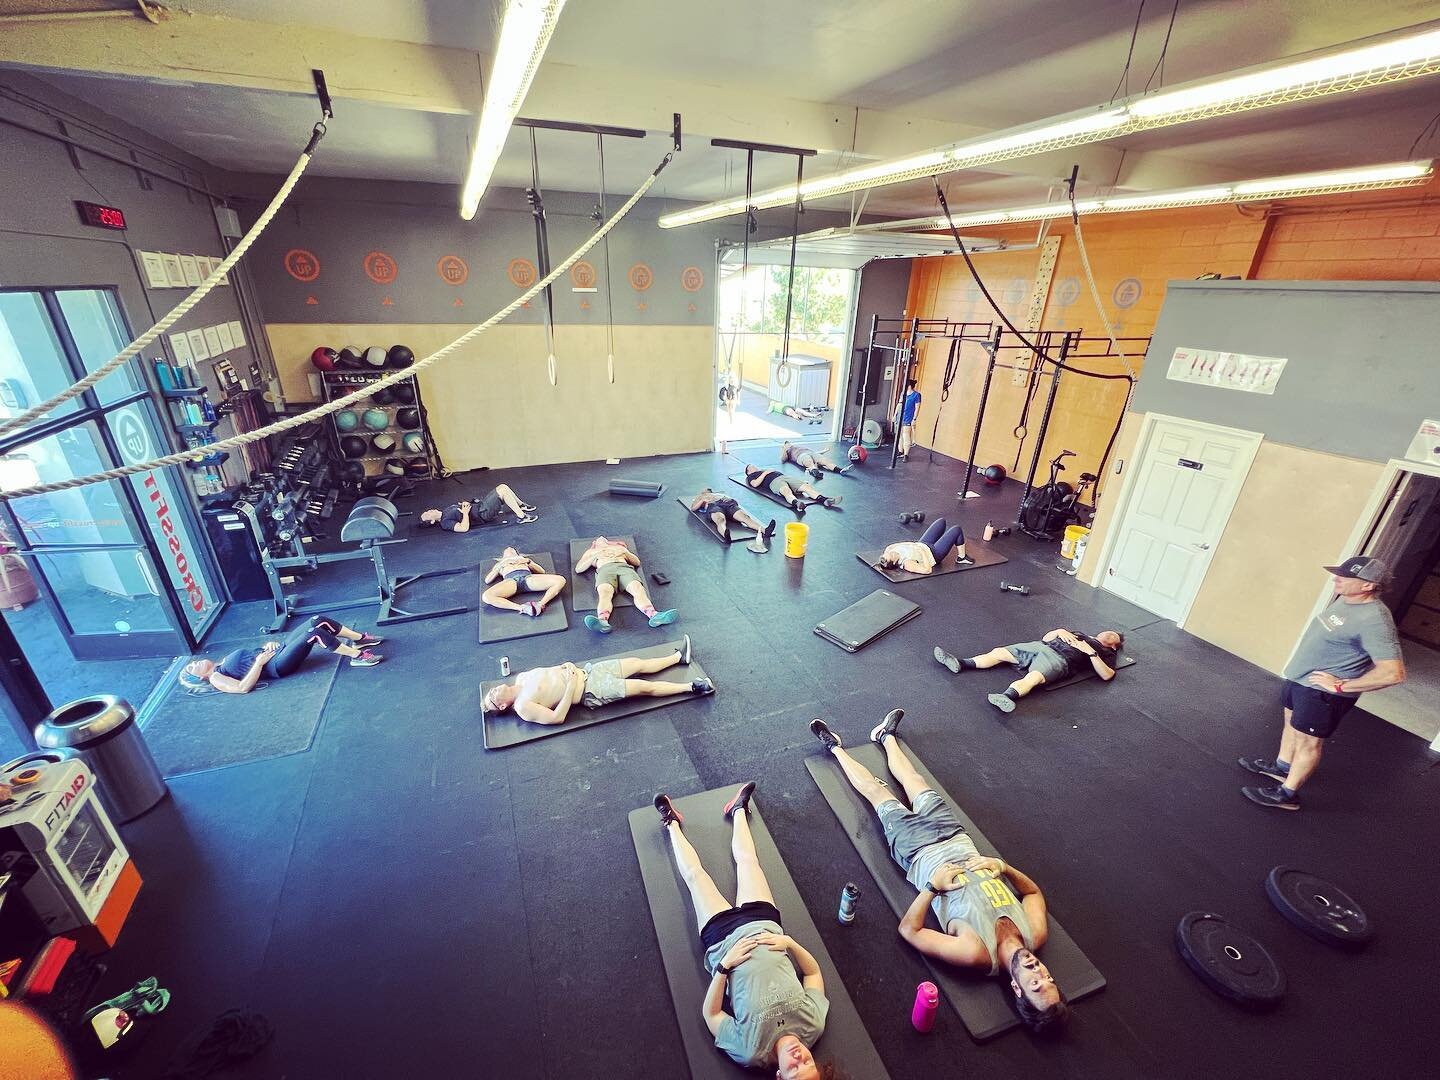 How do you recover after a grueling WOD?

Coach Tim took the 4:15 through a post-WOD recovery breathing session after spending 20-ish minutes in a high heart rate state.

Getting the body out of sympathetic(fight or flight) drive and back into a para